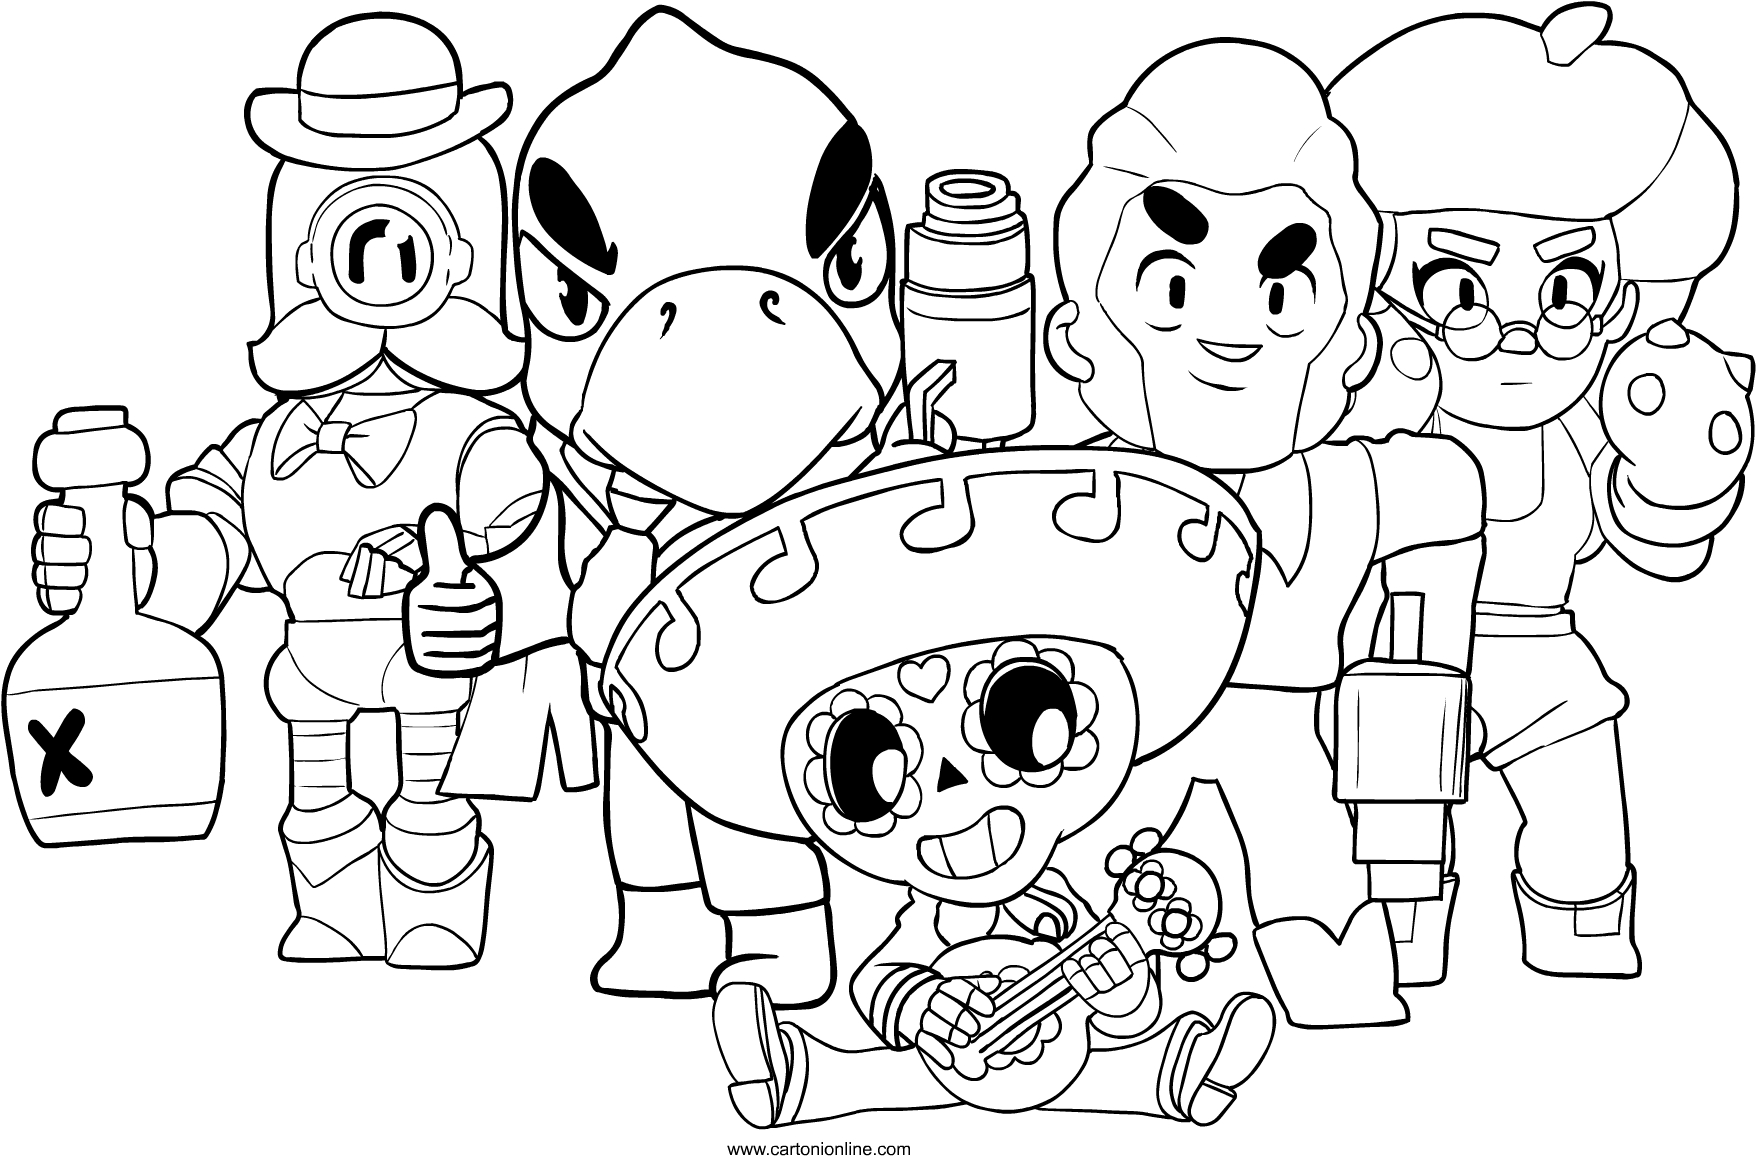 Drawing of Brawl Stars characters to print and color